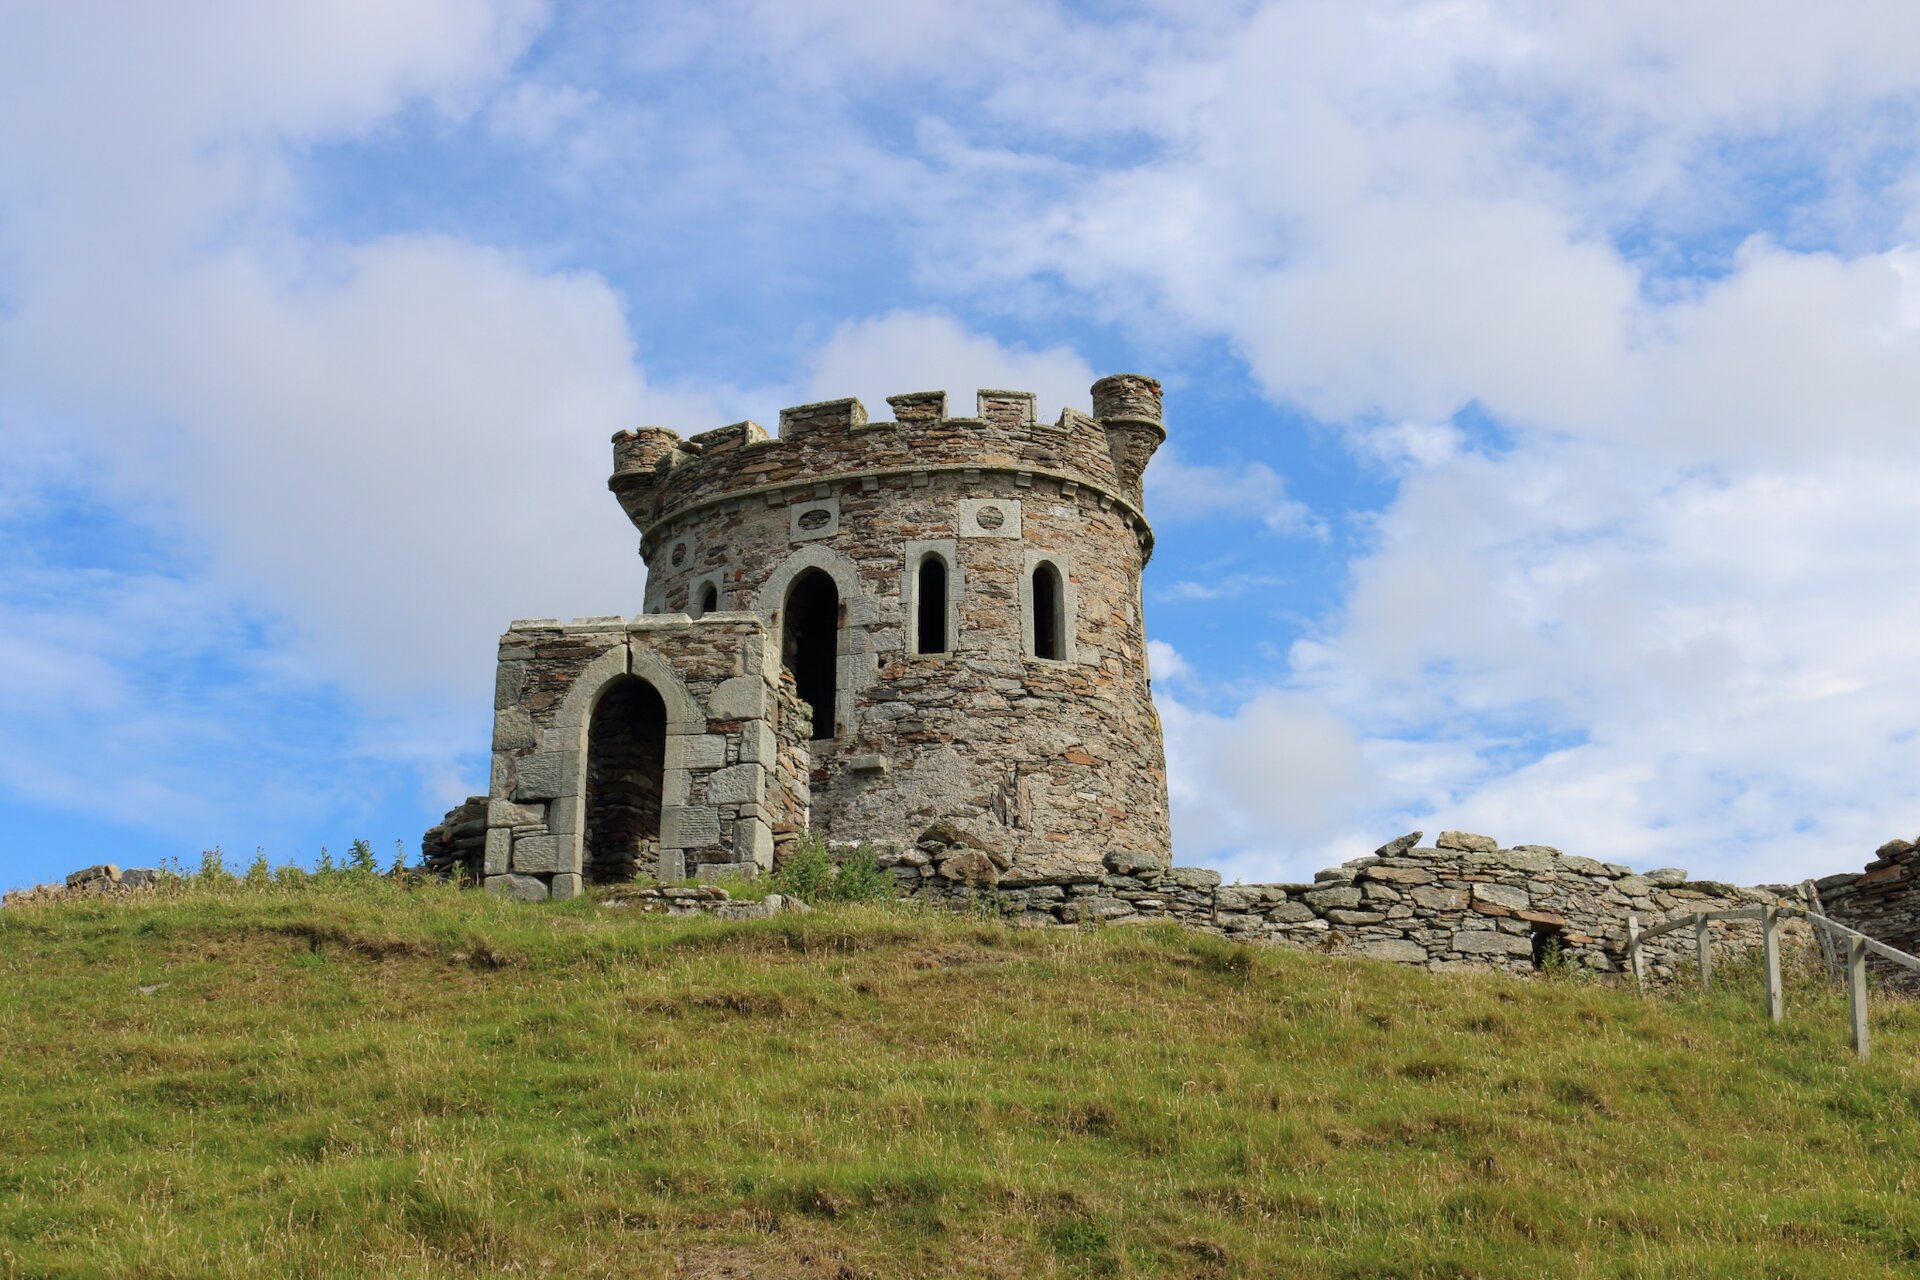 Observation Tower, Brough Lodge. Photo by Laurie Goodlad